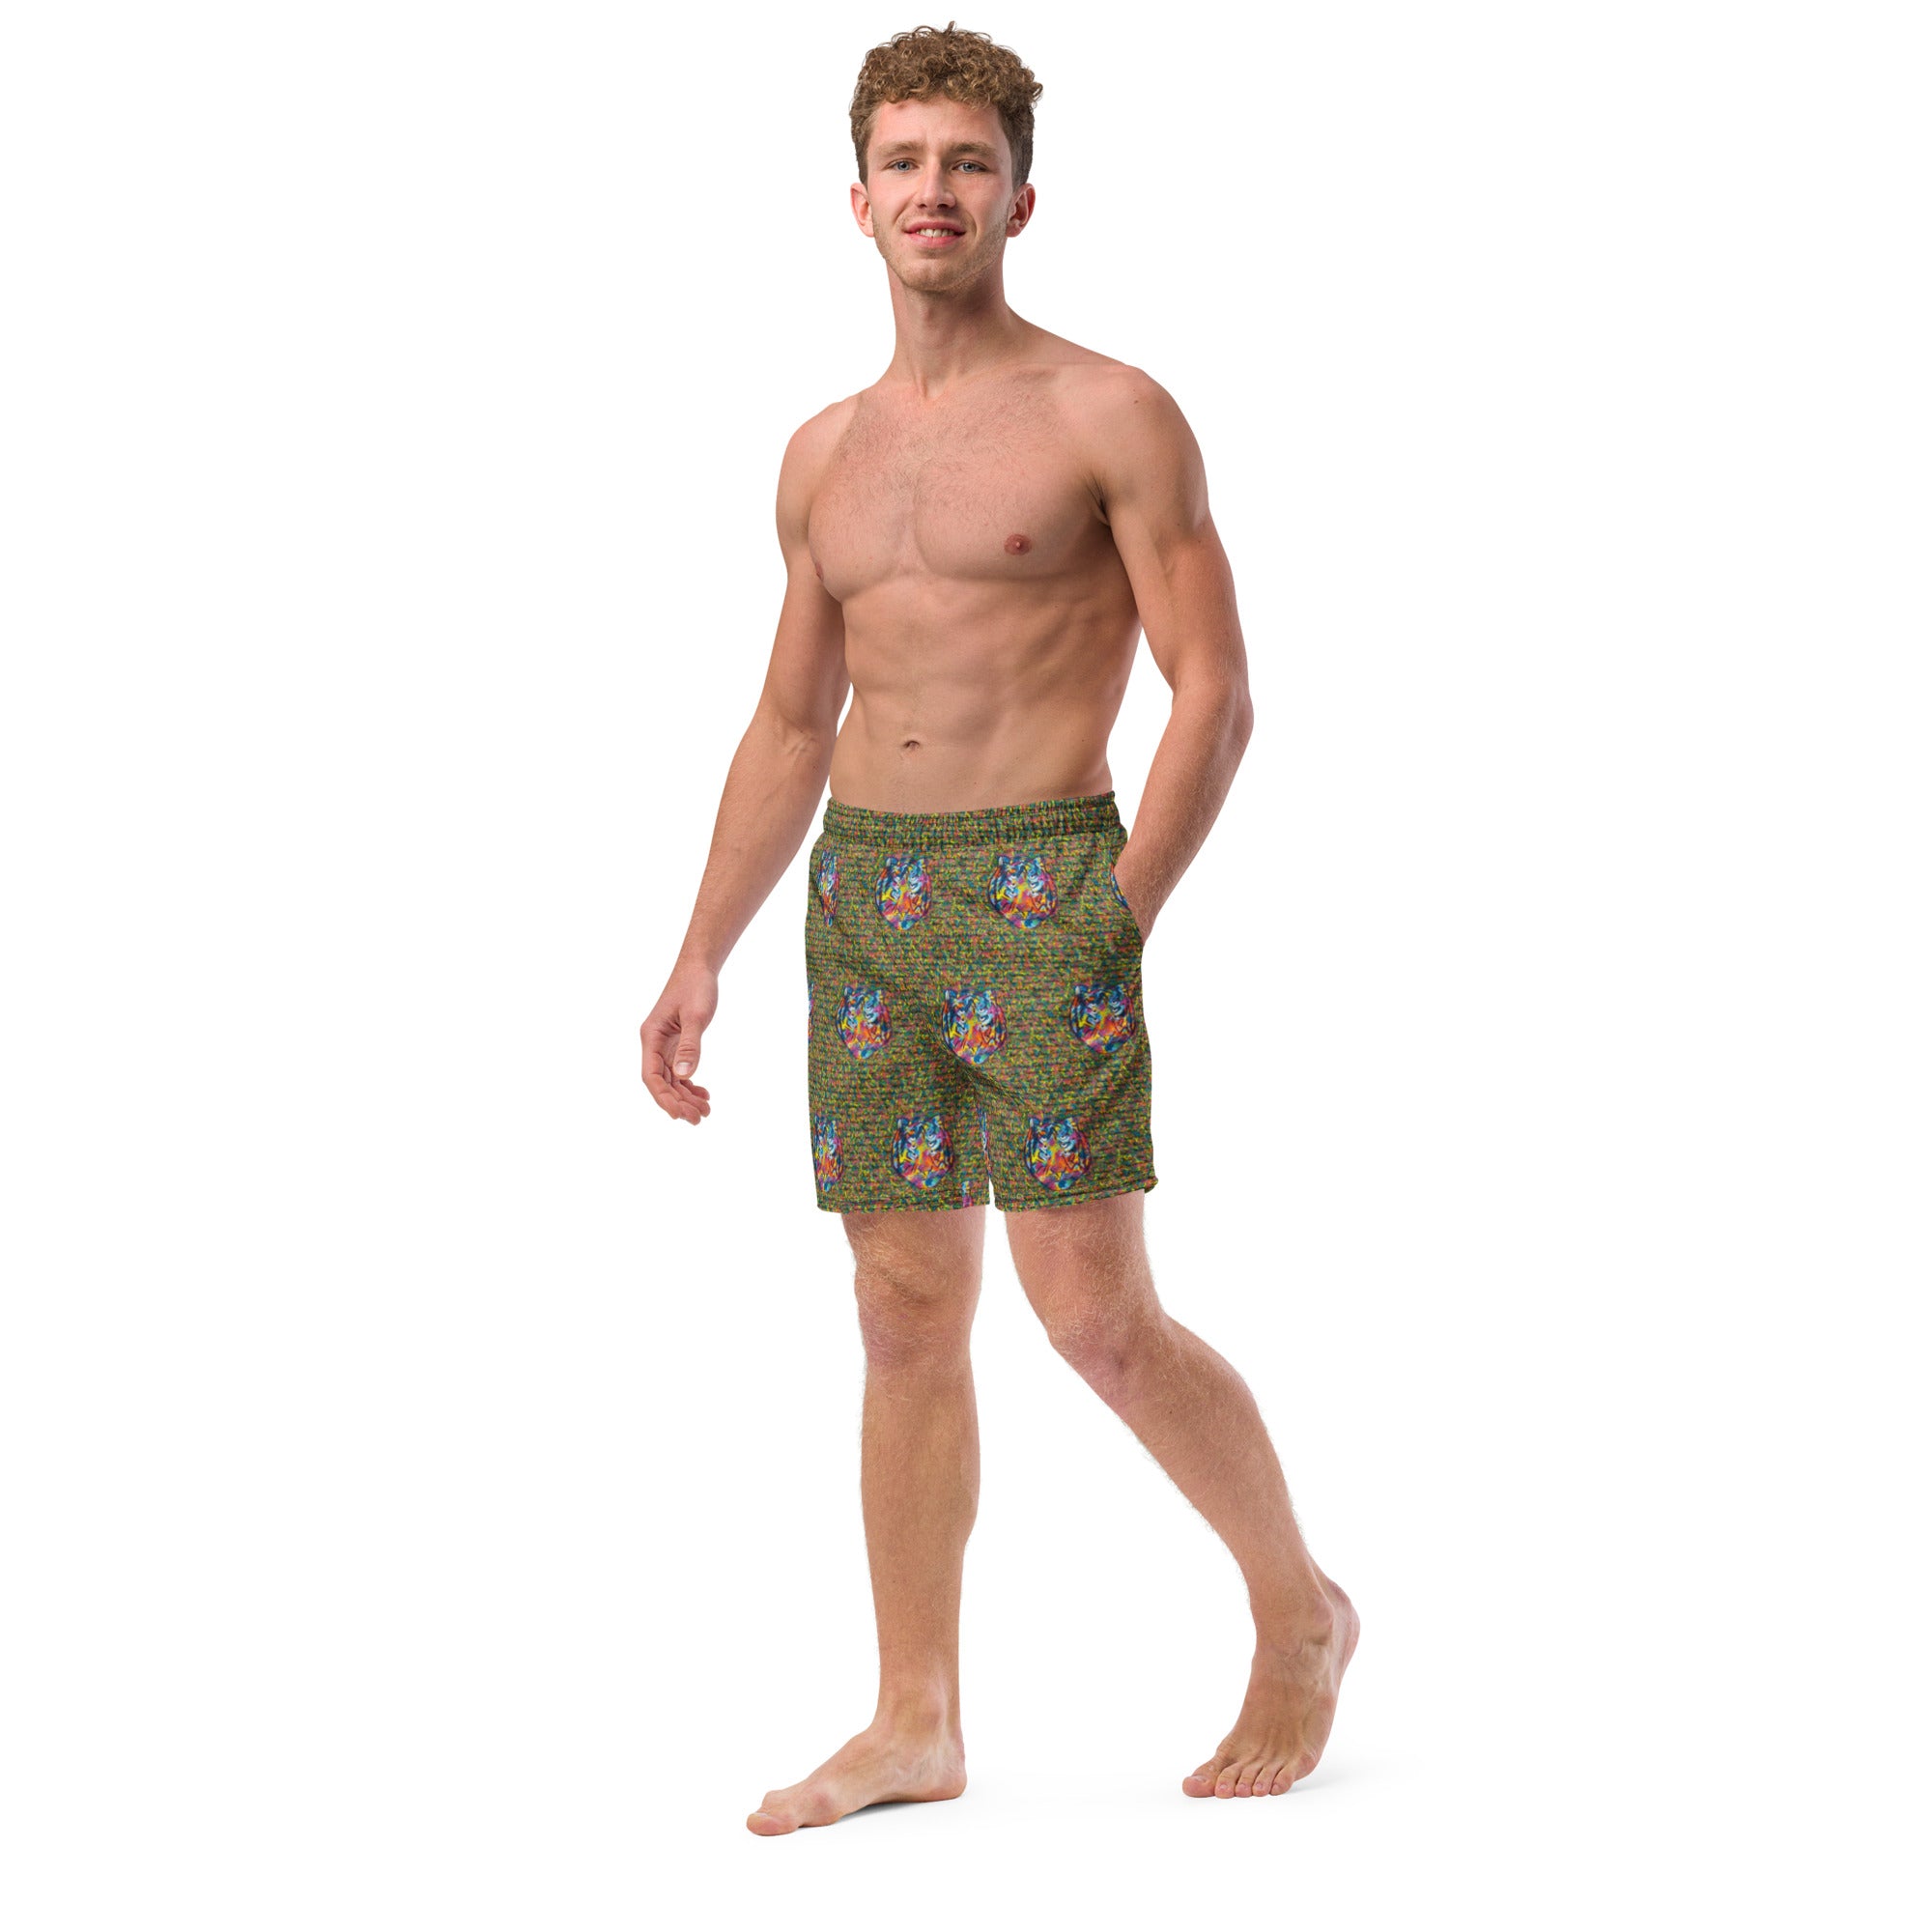 Men's swim trunks official Team Super Happiness Rainbow Bicycle Tiger Signature Suit